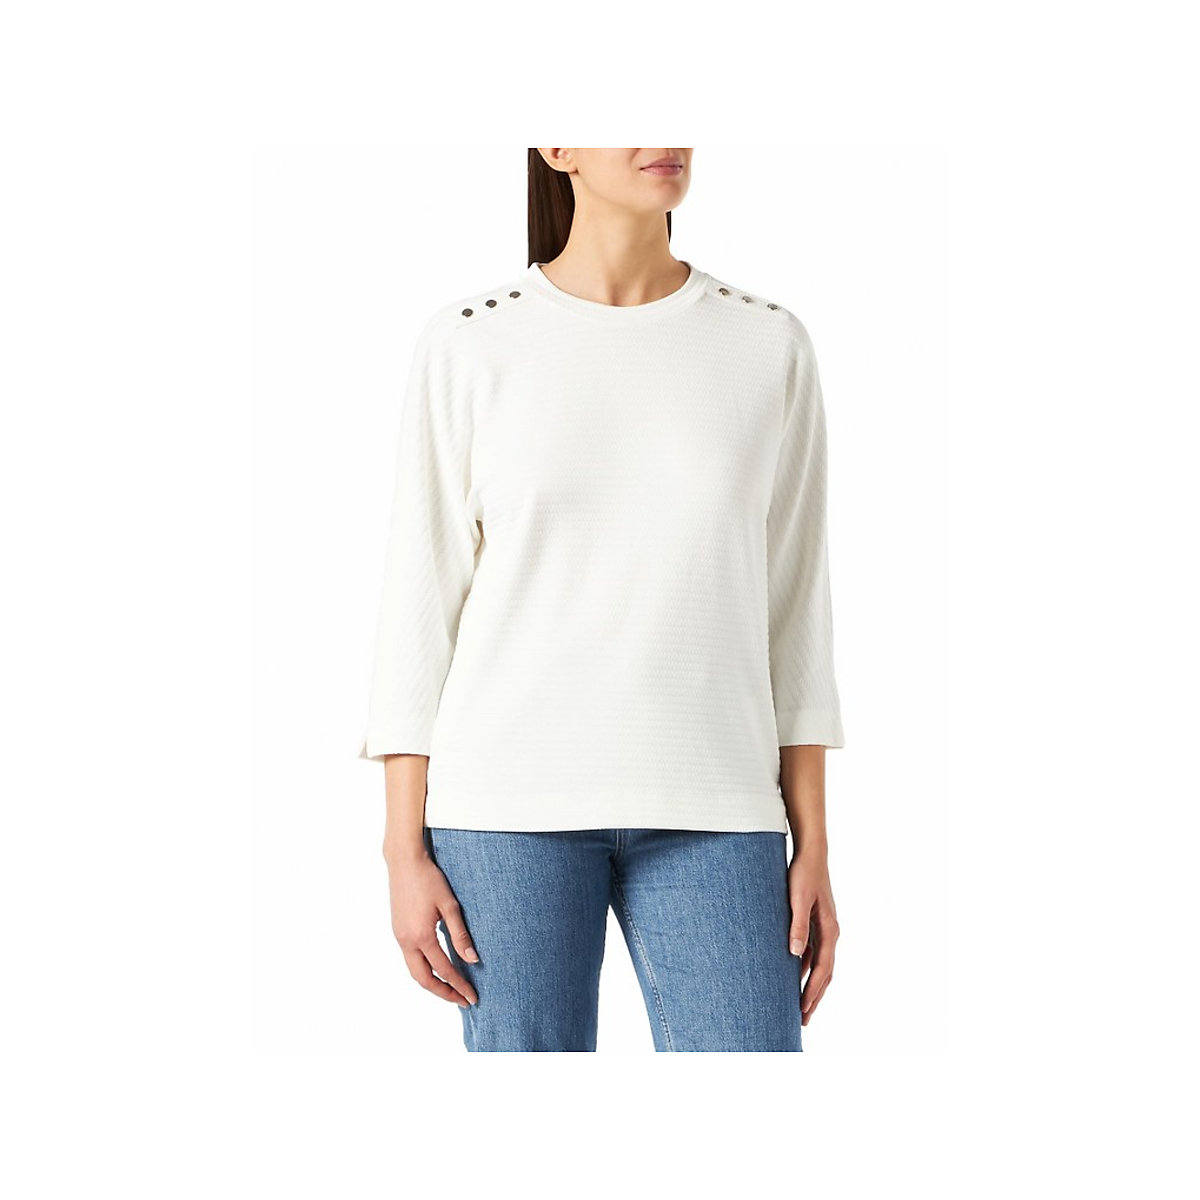 Gerry Weber T-Shirts offwhite